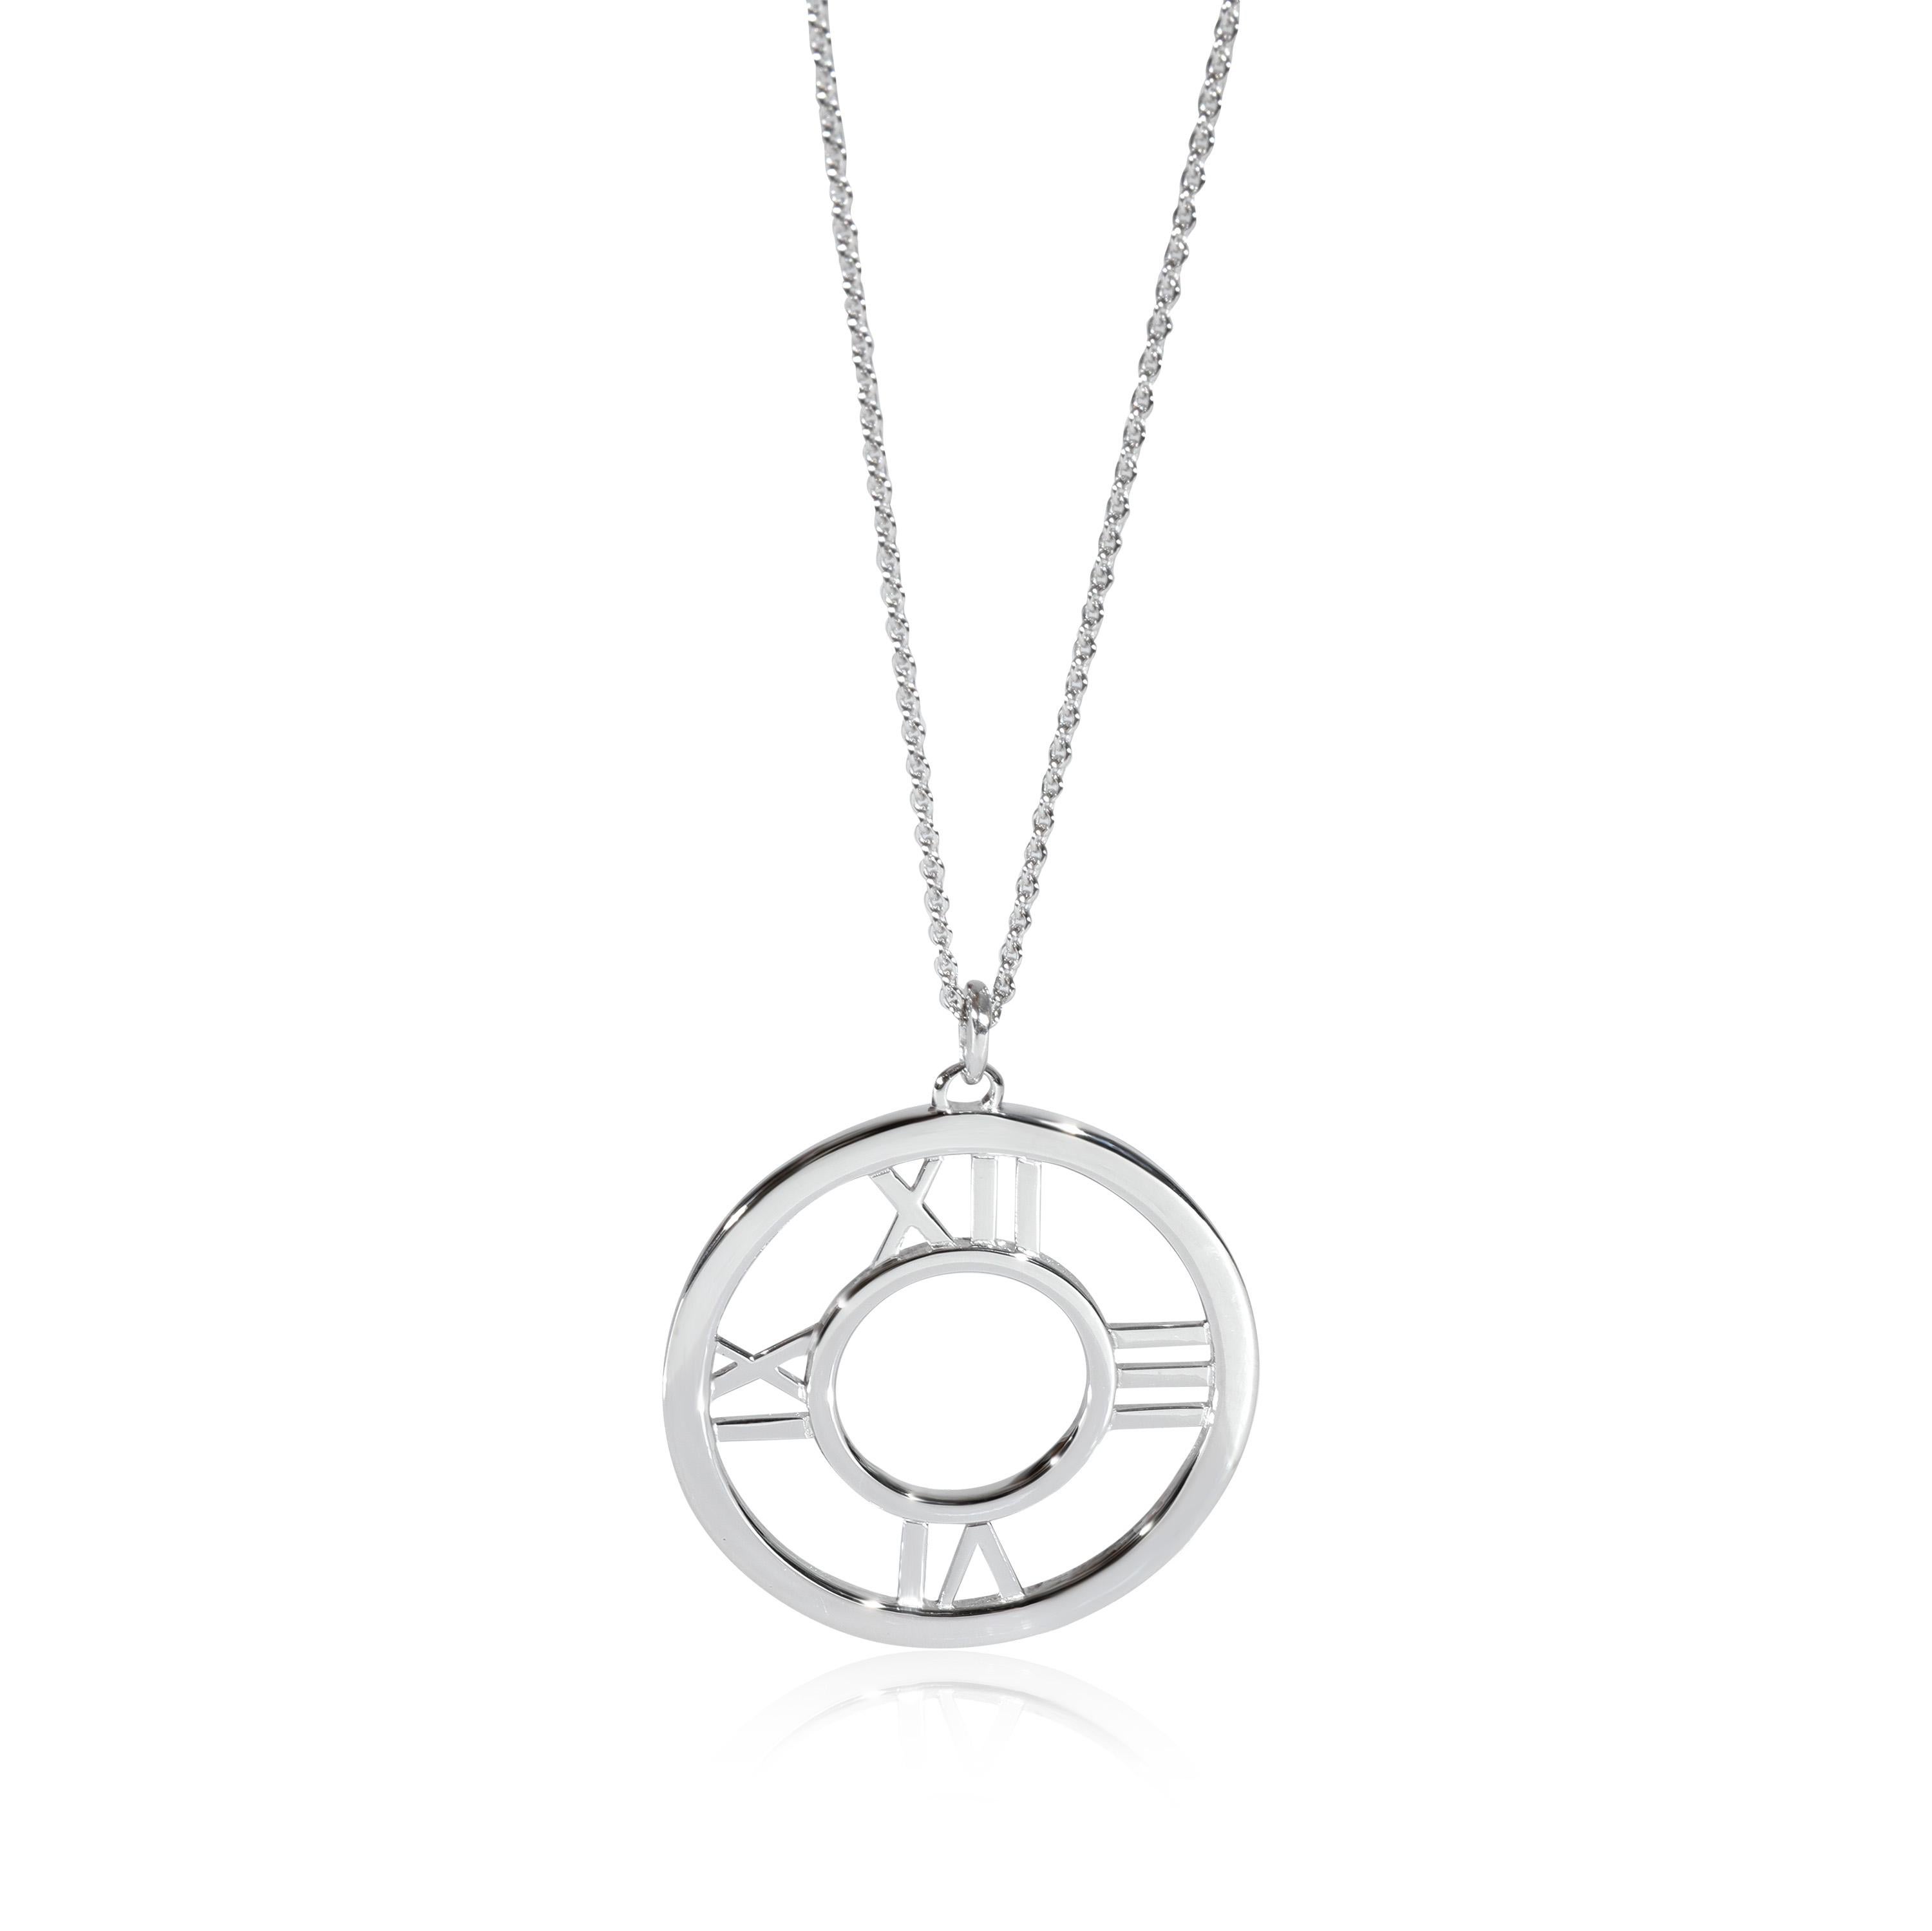 Tiffany & Co. Atlas Pierced Open Pendant in 18k White Gold

PRIMARY DETAILS
SKU: 130490
Listing Title: Tiffany & Co. Atlas Pierced Open Pendant in 18k White Gold
Condition Description: Above Tiffany's New York flagship store is the Atlas clock,